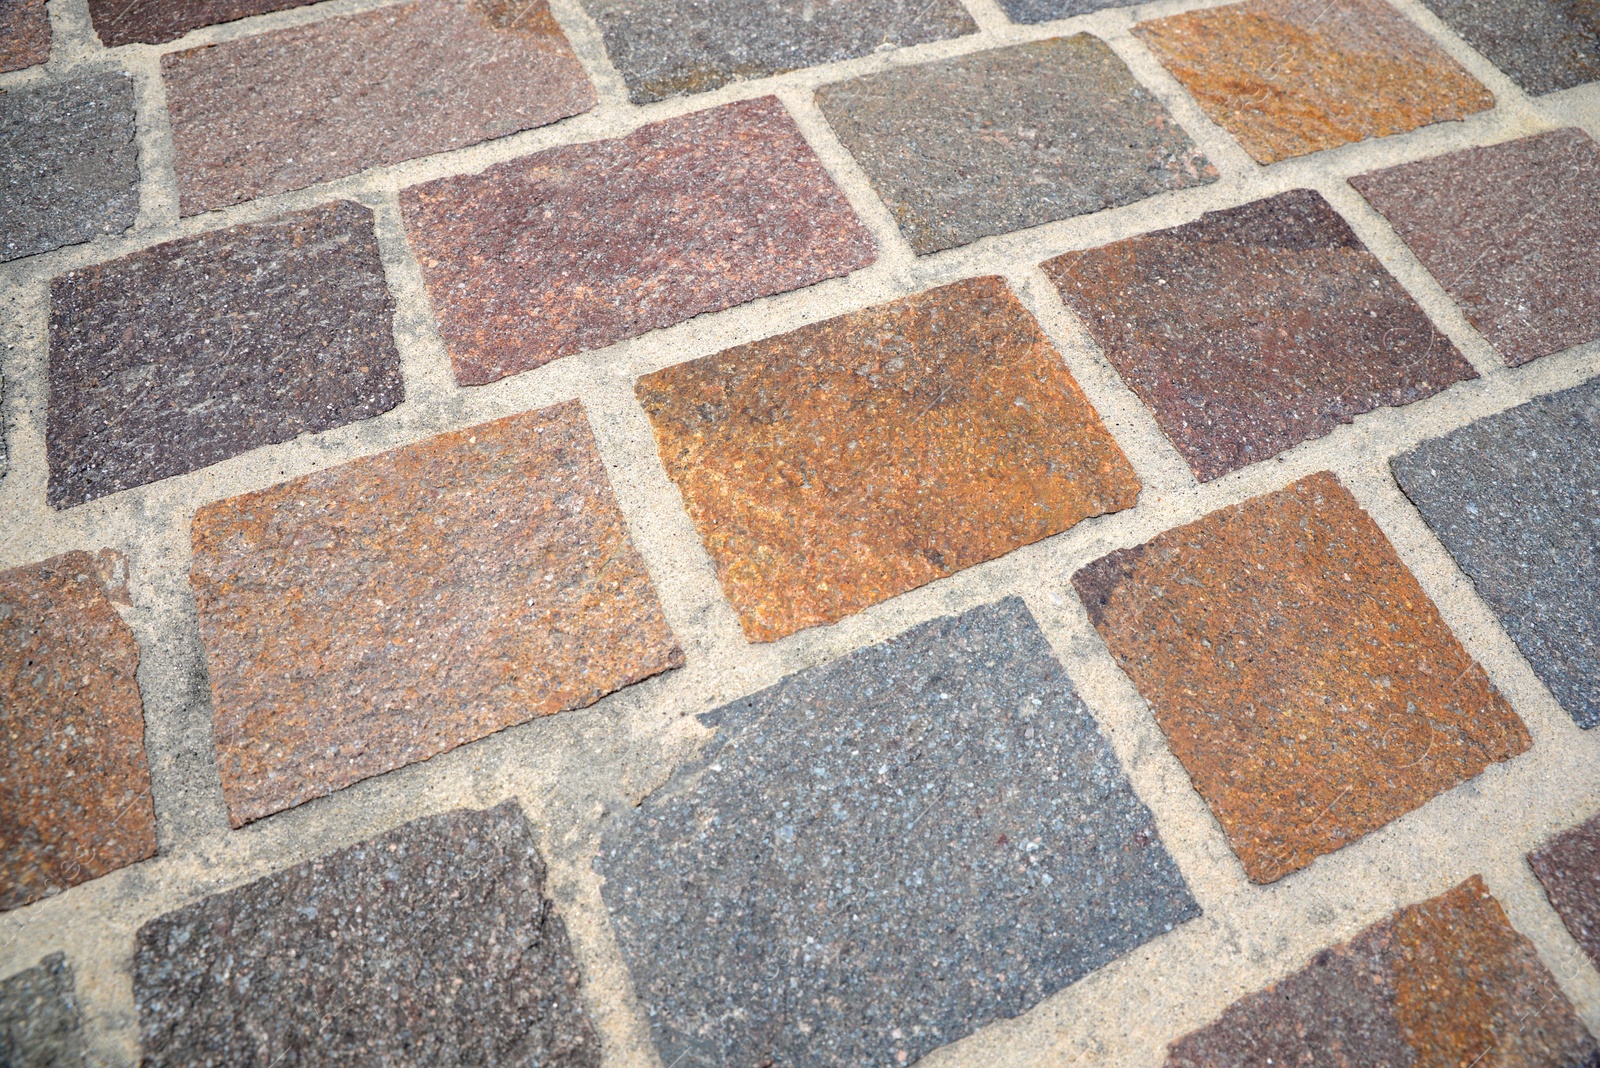 Photo of Pavement made of tiles as background, closeup